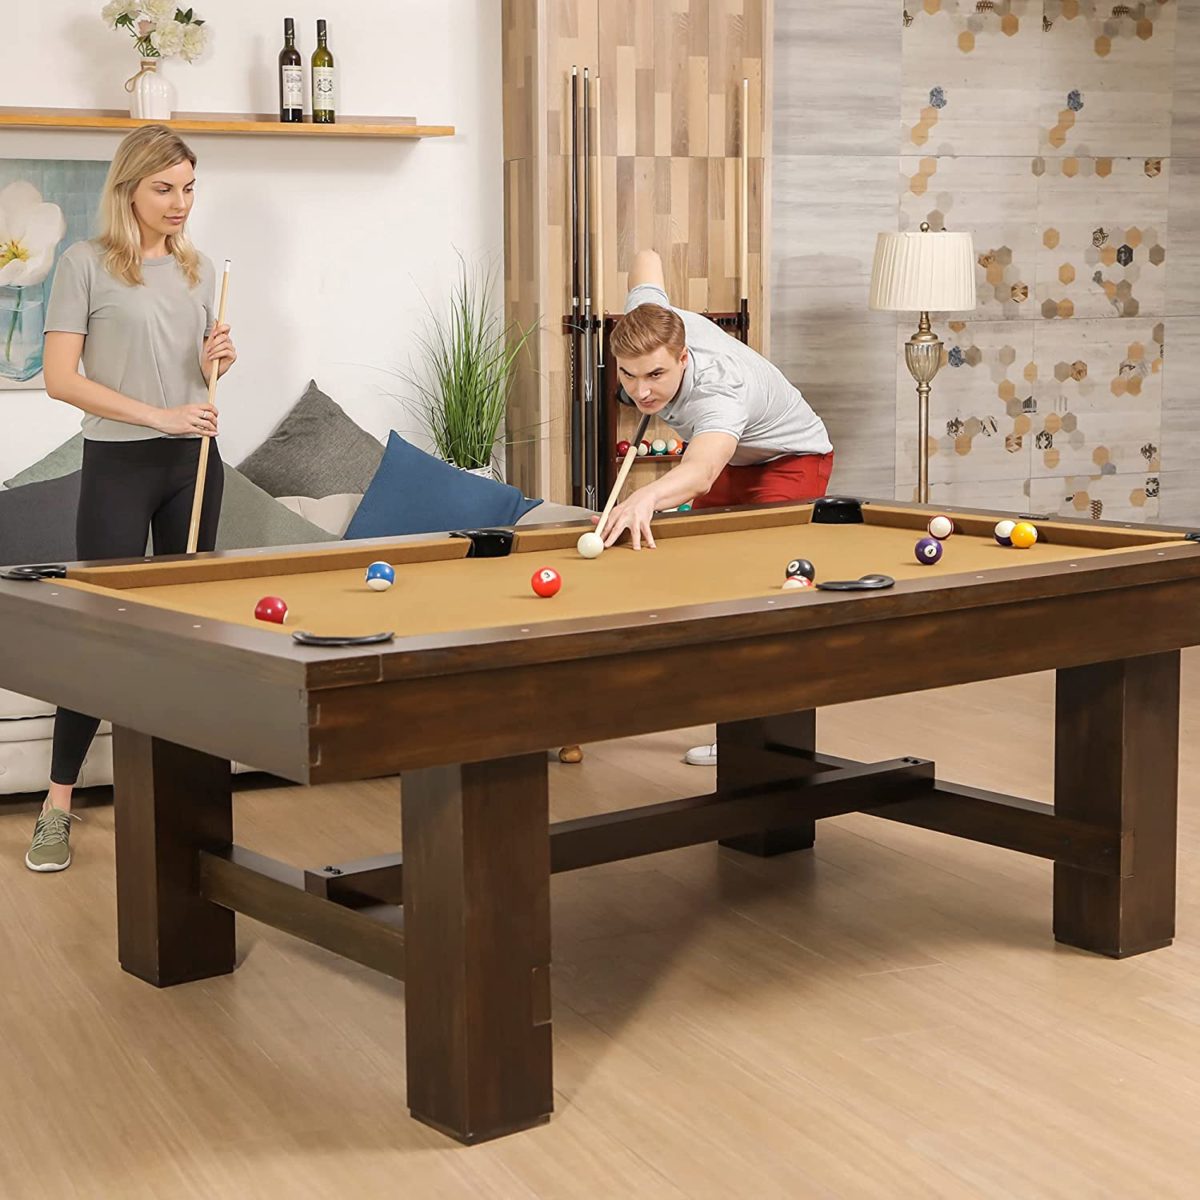 Best Pool Table Brands 9 1200x1200 